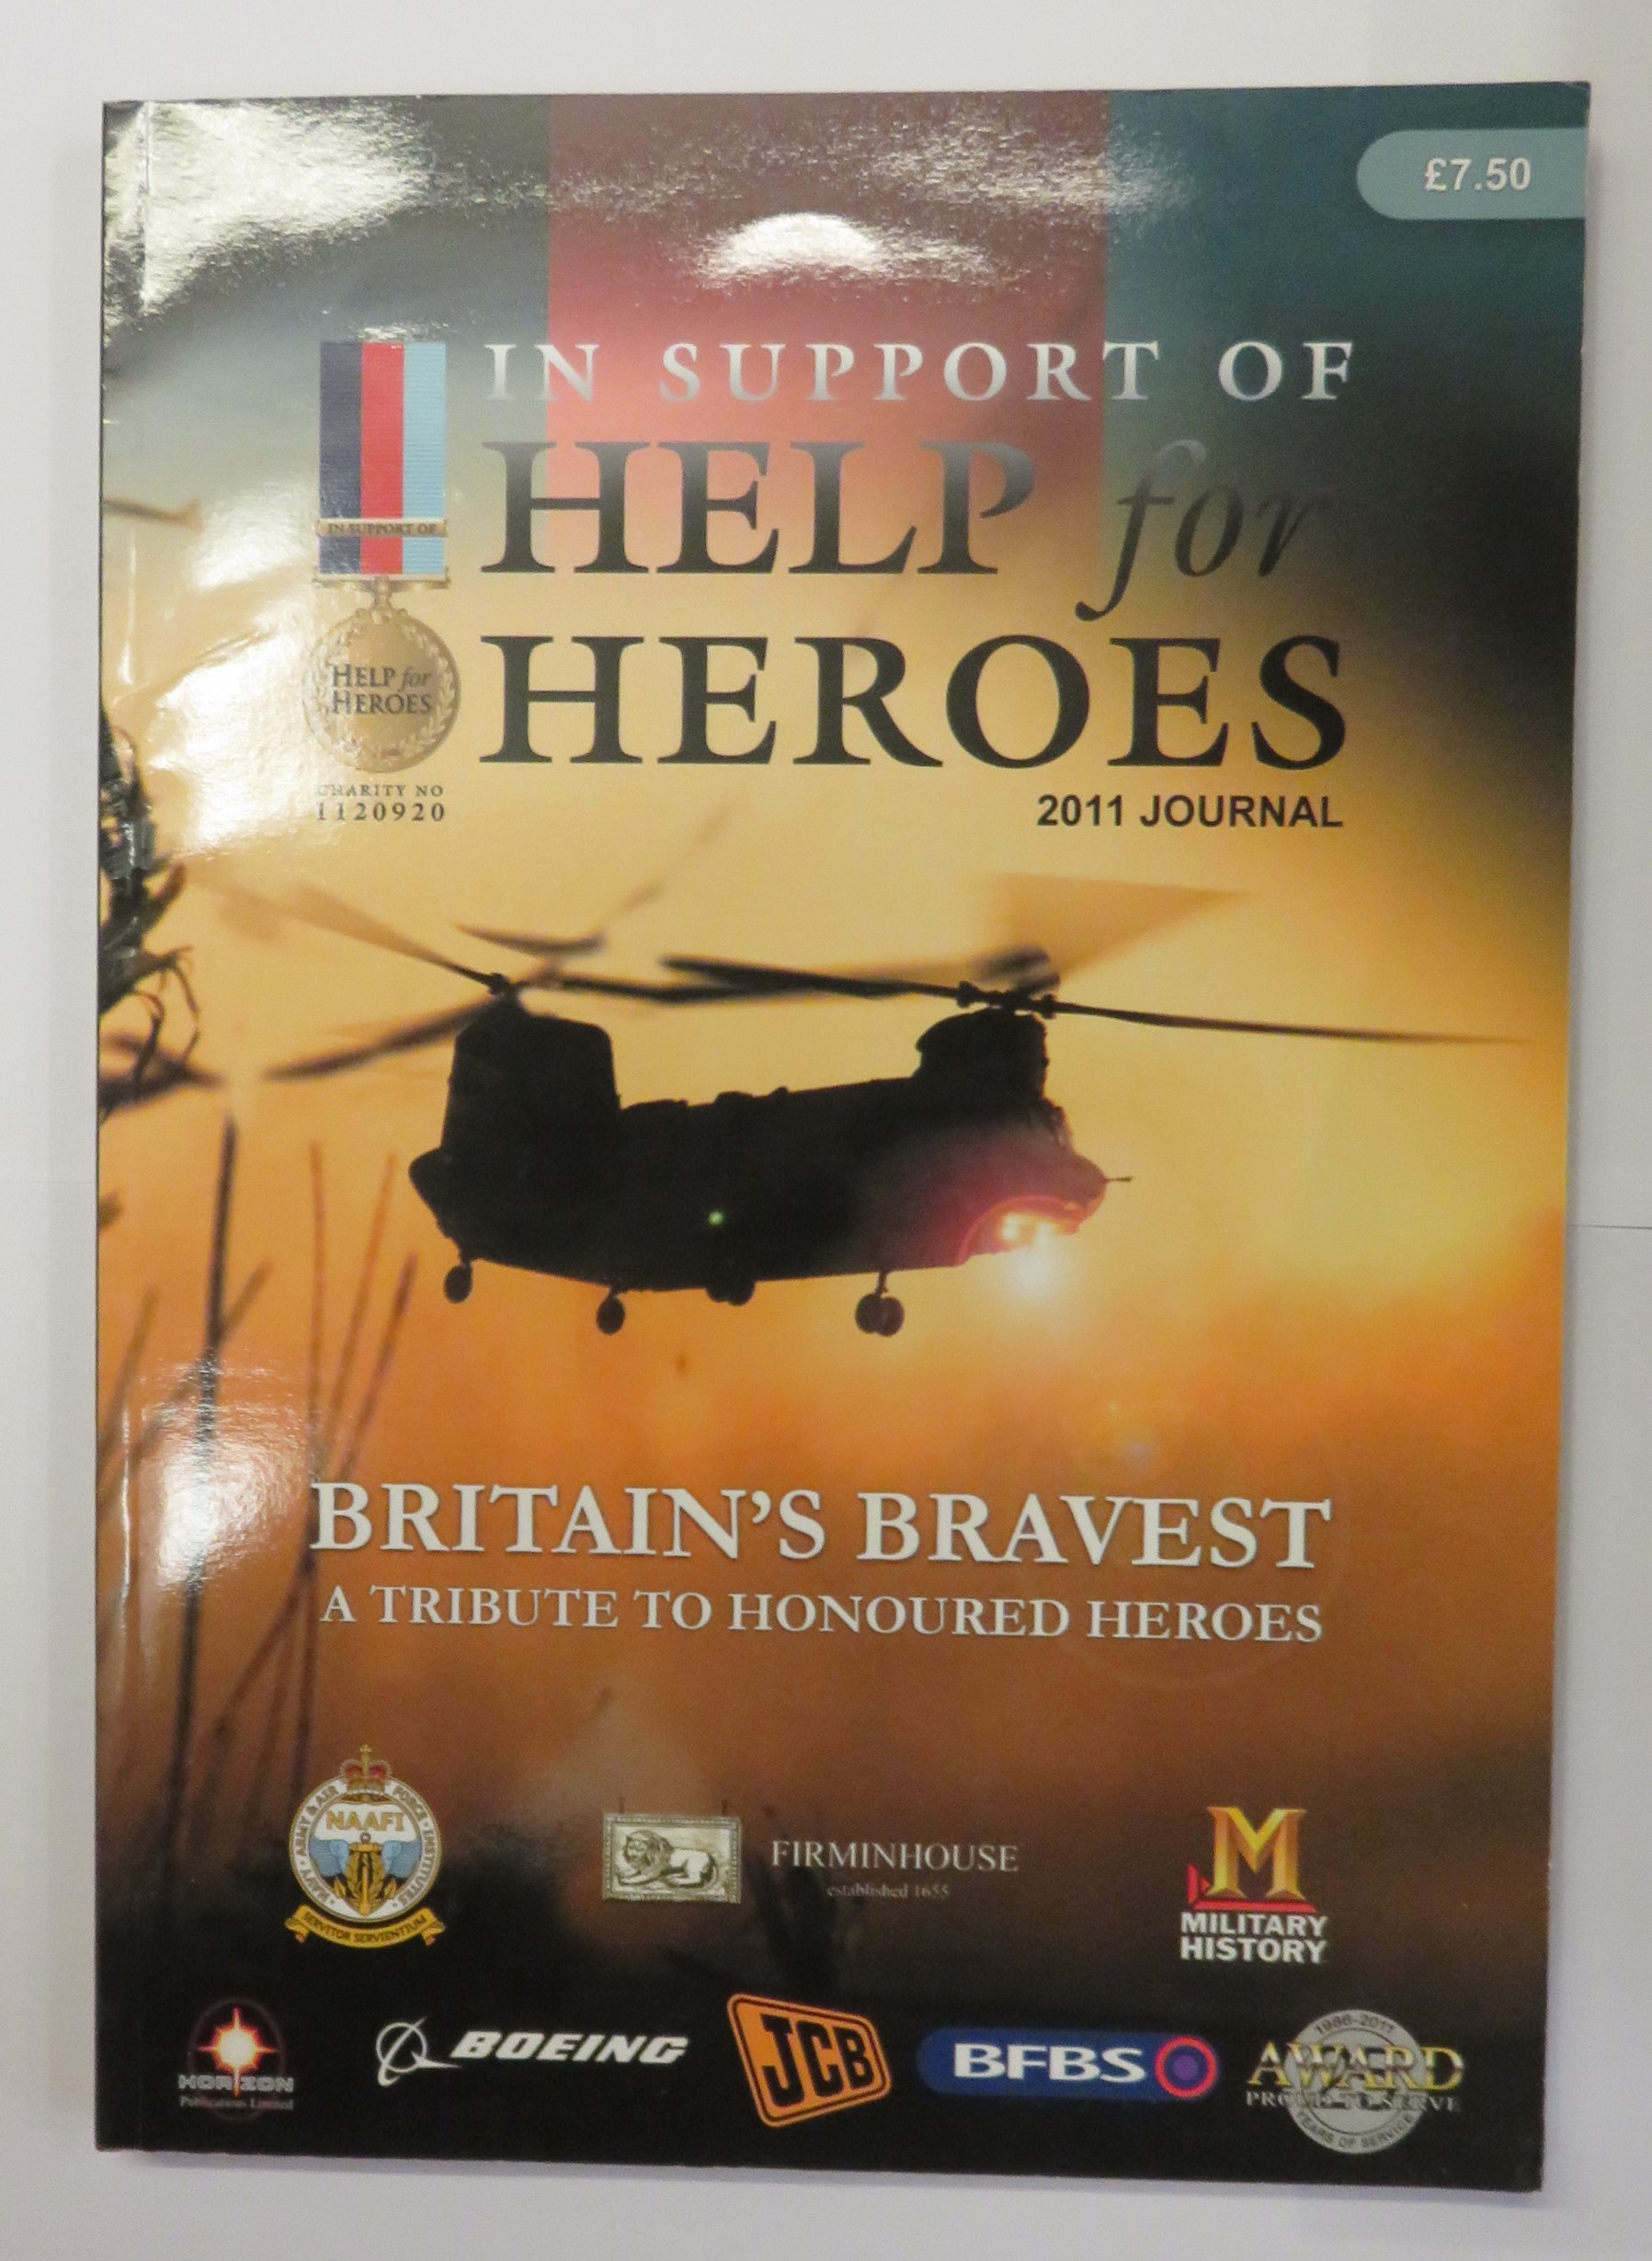 In Support of Help for Heroes 2011 Journal